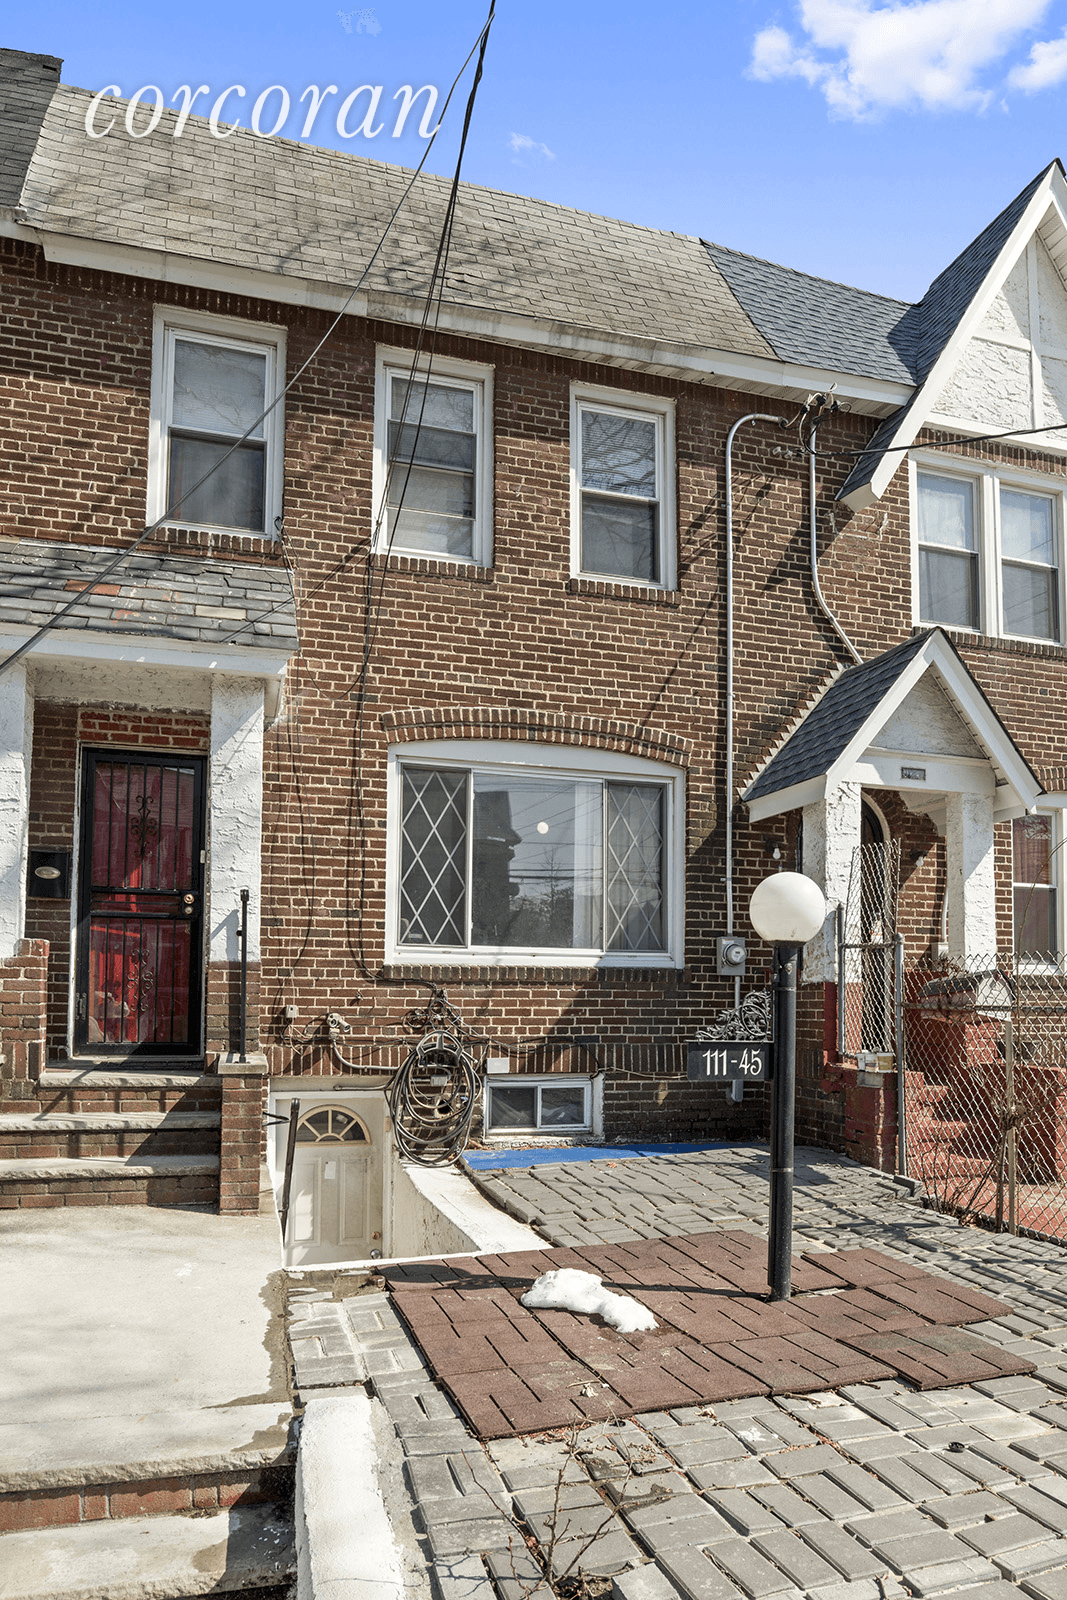 A lovely BRICK Townhouse in Beautiful St Albans Queens, The St Albans neighborhood was once home to Great Jazz musicians like Count Basie, Lena Horne, Ella Fitzgerald, John Coltrane, and ...